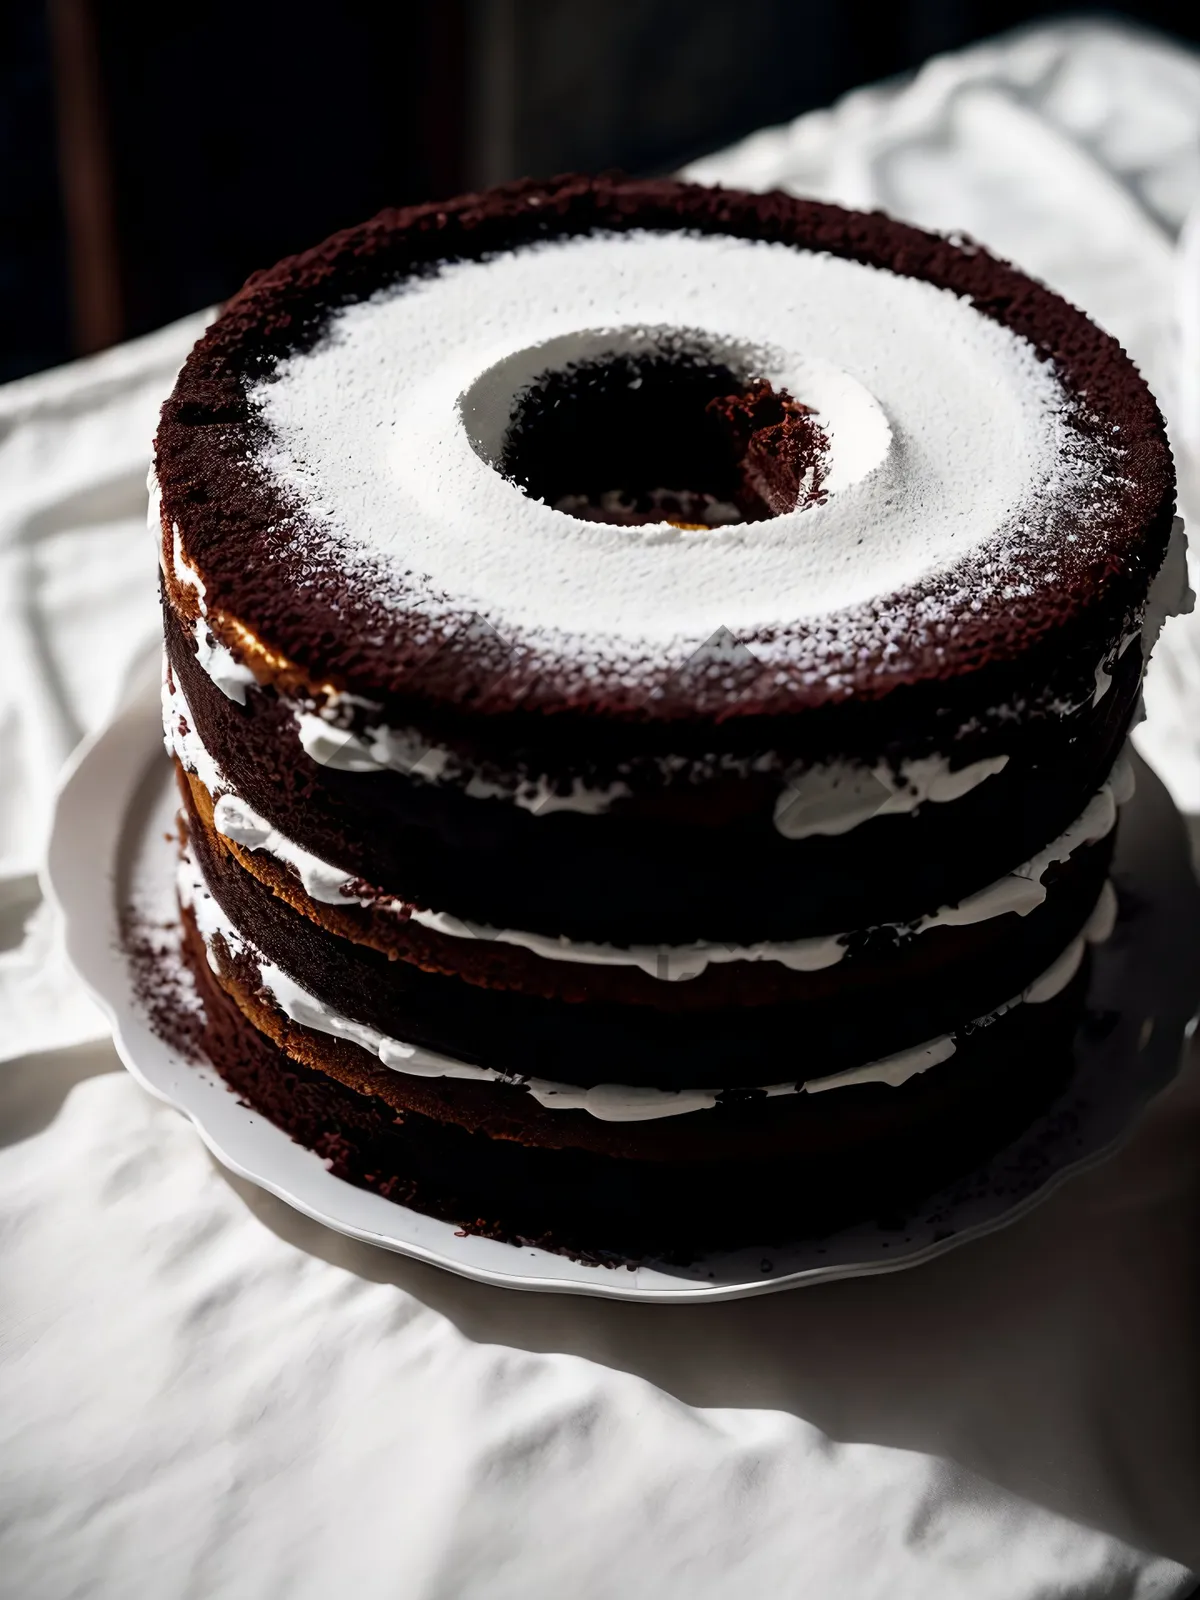 Picture of Delicious Chocolate Cake with Decadent Sauce